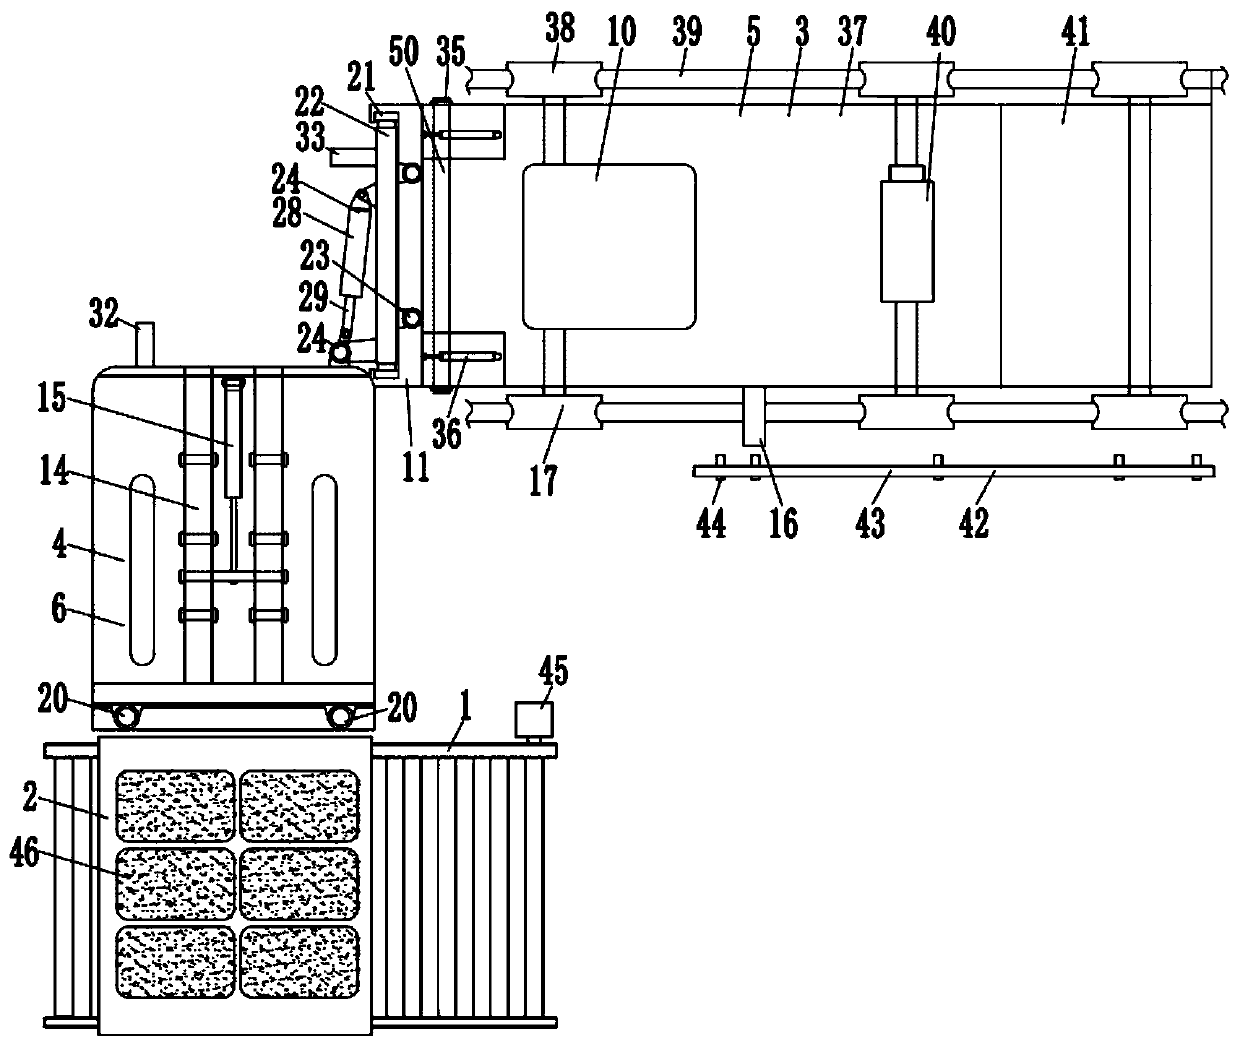 Automatic loading system for emulsified ammonium nitrate fuel oil explosives